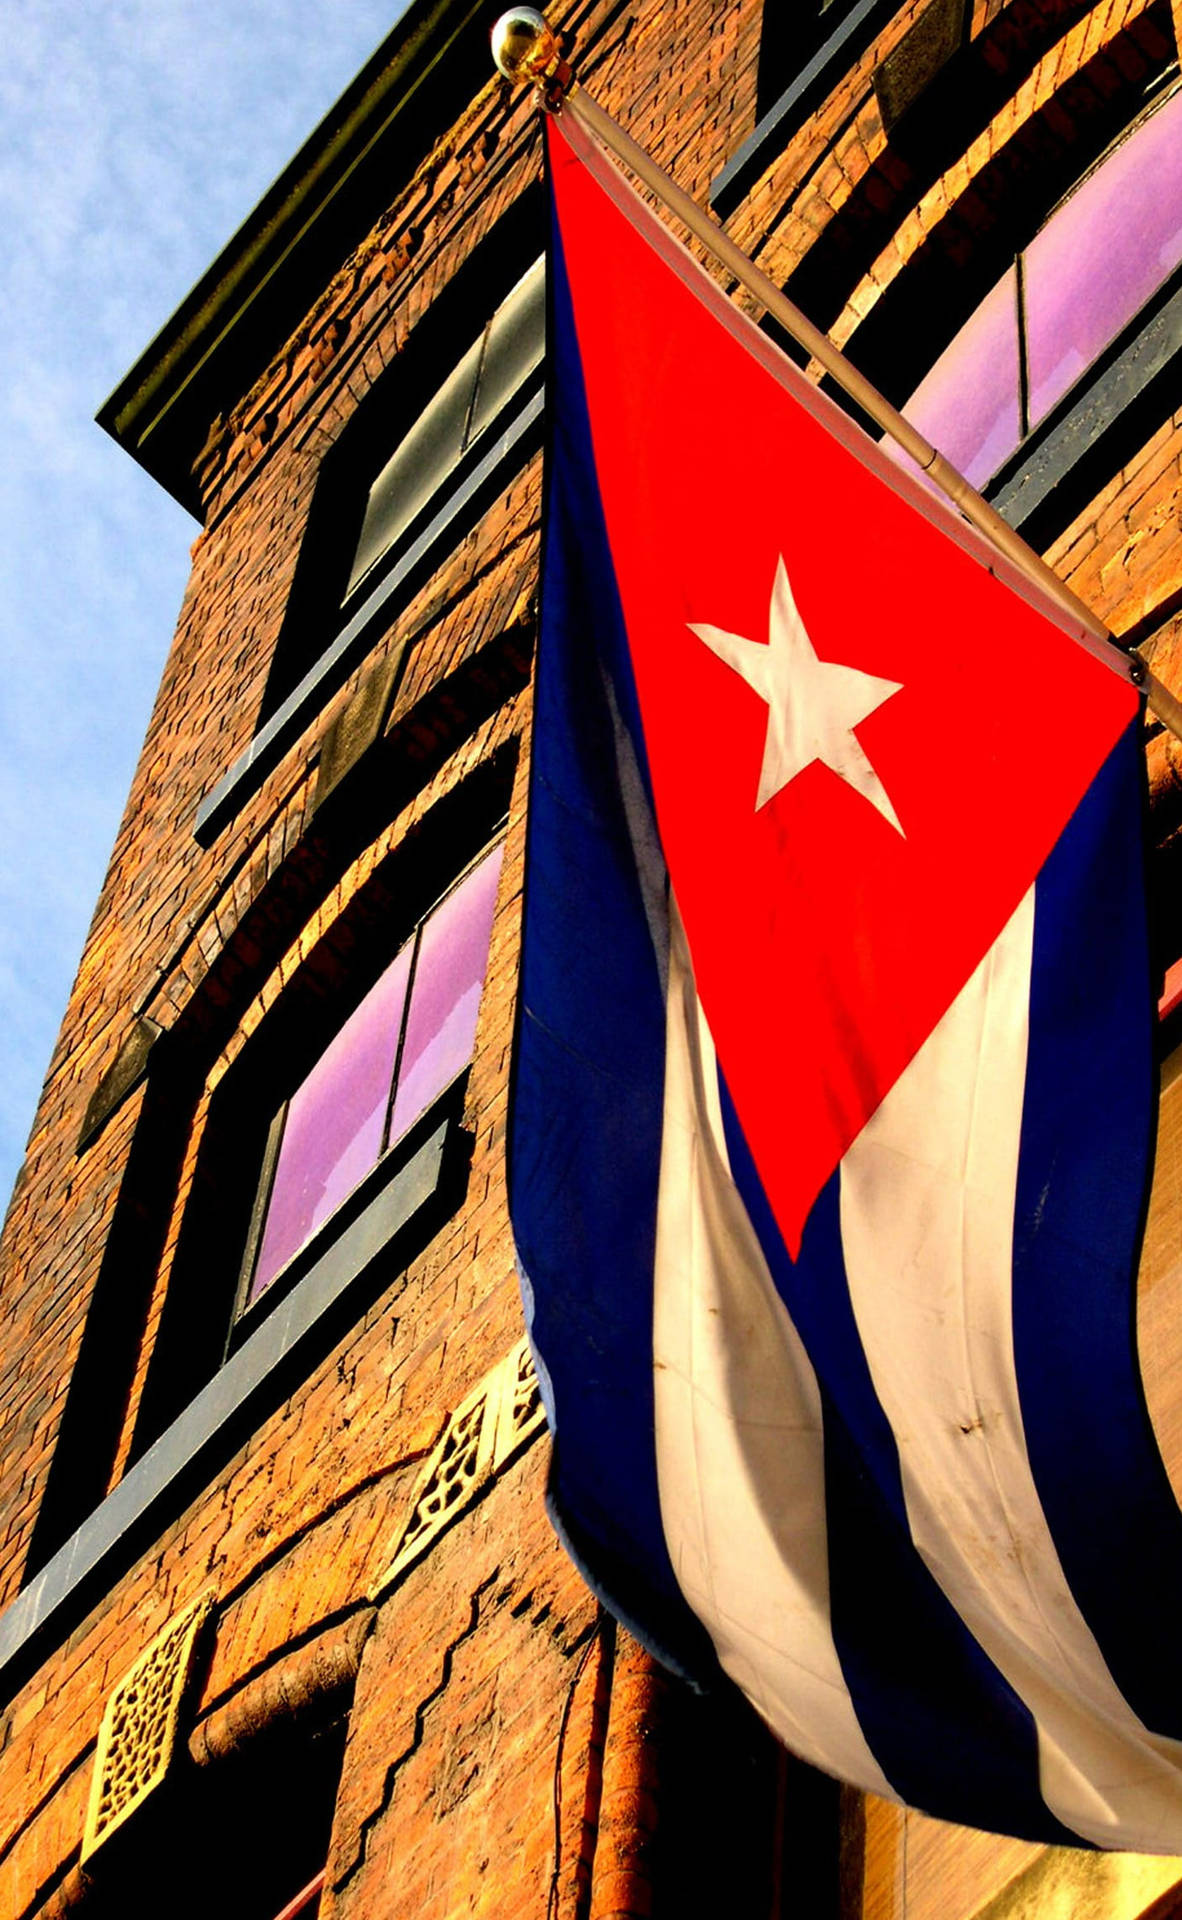 Cuban Flag Hanged In Building